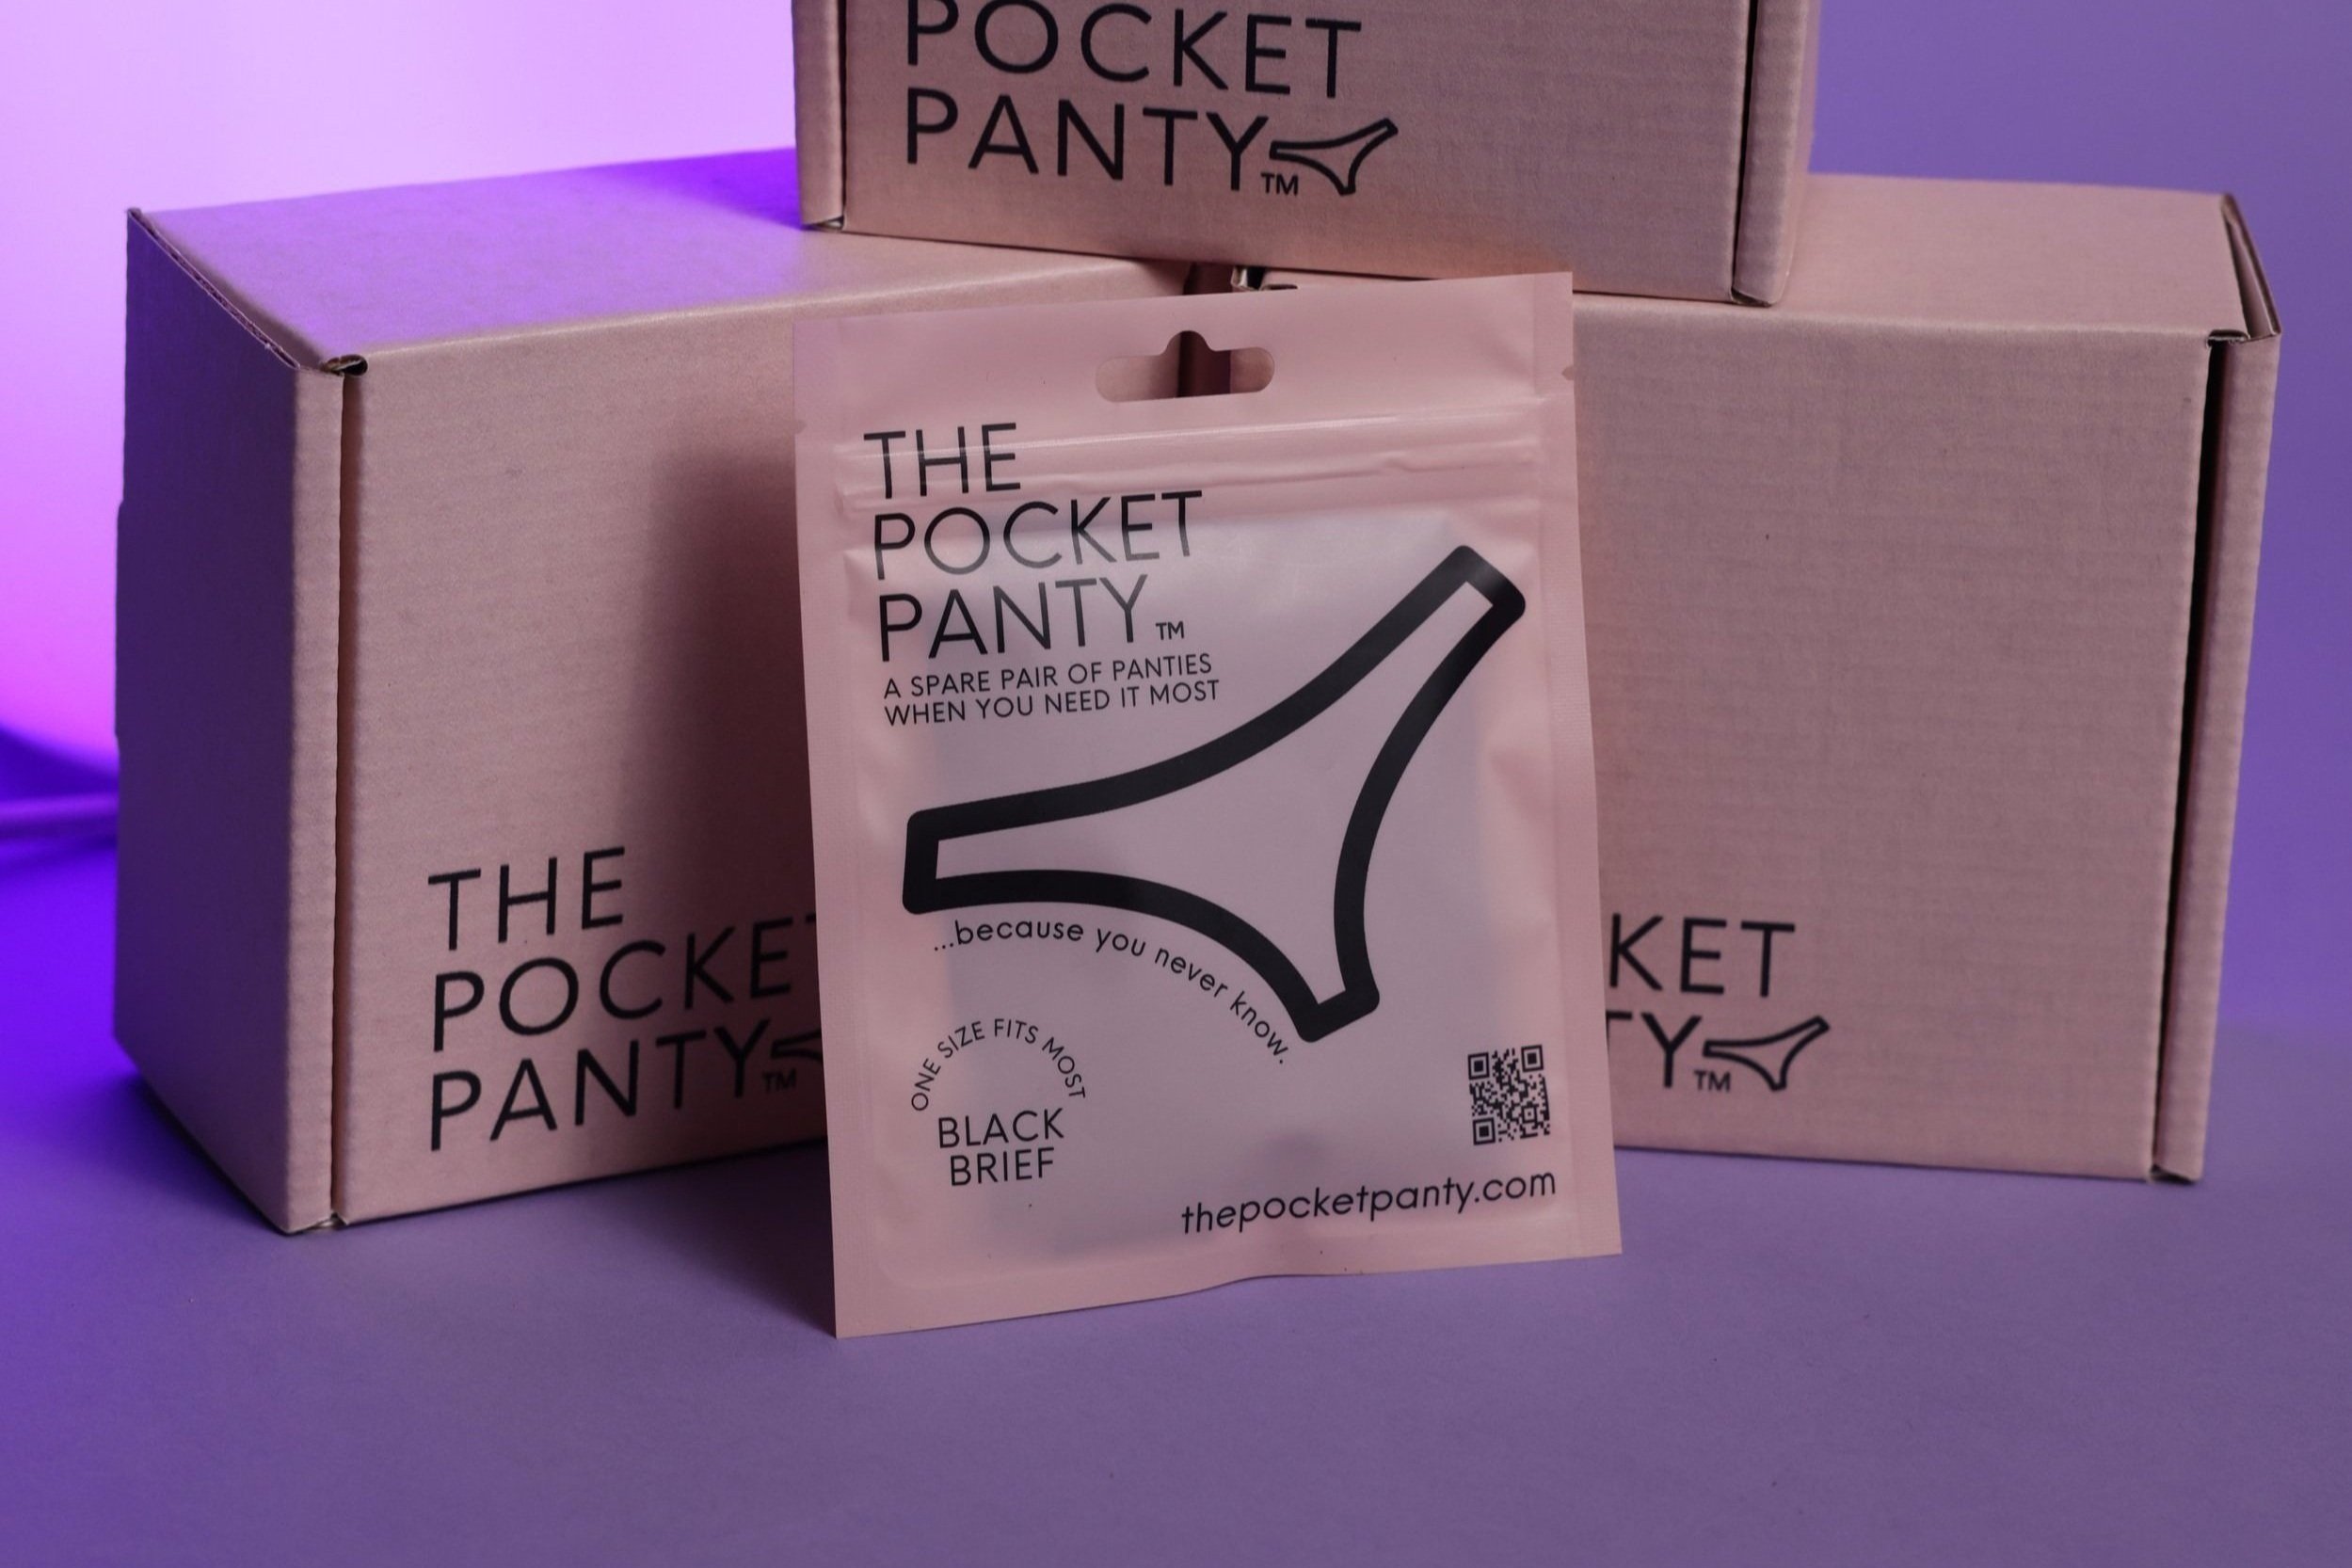 We've Got Your Booty Covered!-The Pocket Panty because you never know